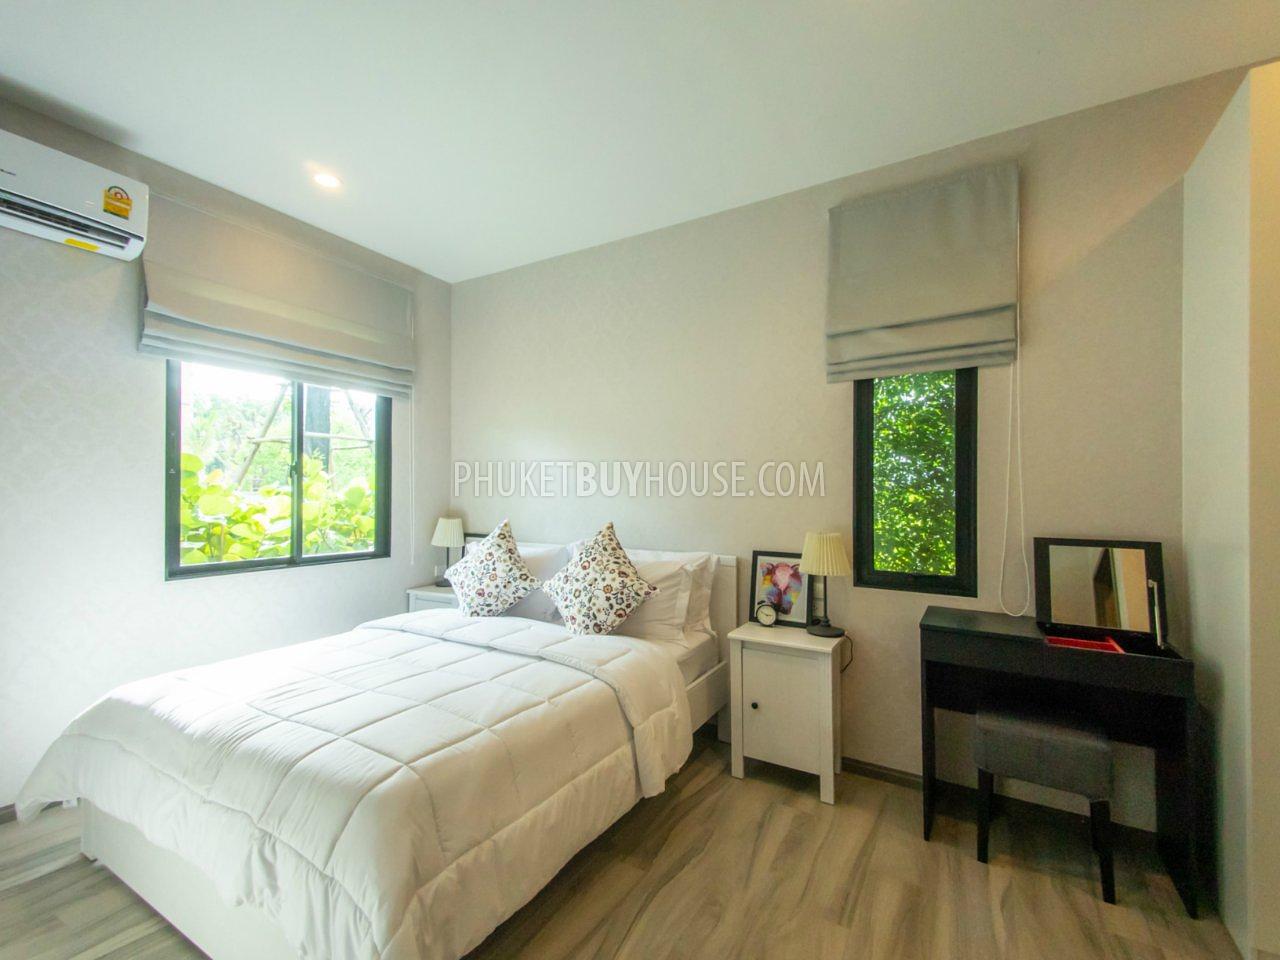 NAY6197: 1 Bedroom Apartment in a New Project within Walking Distance to Nai Yang Beach. Photo #4